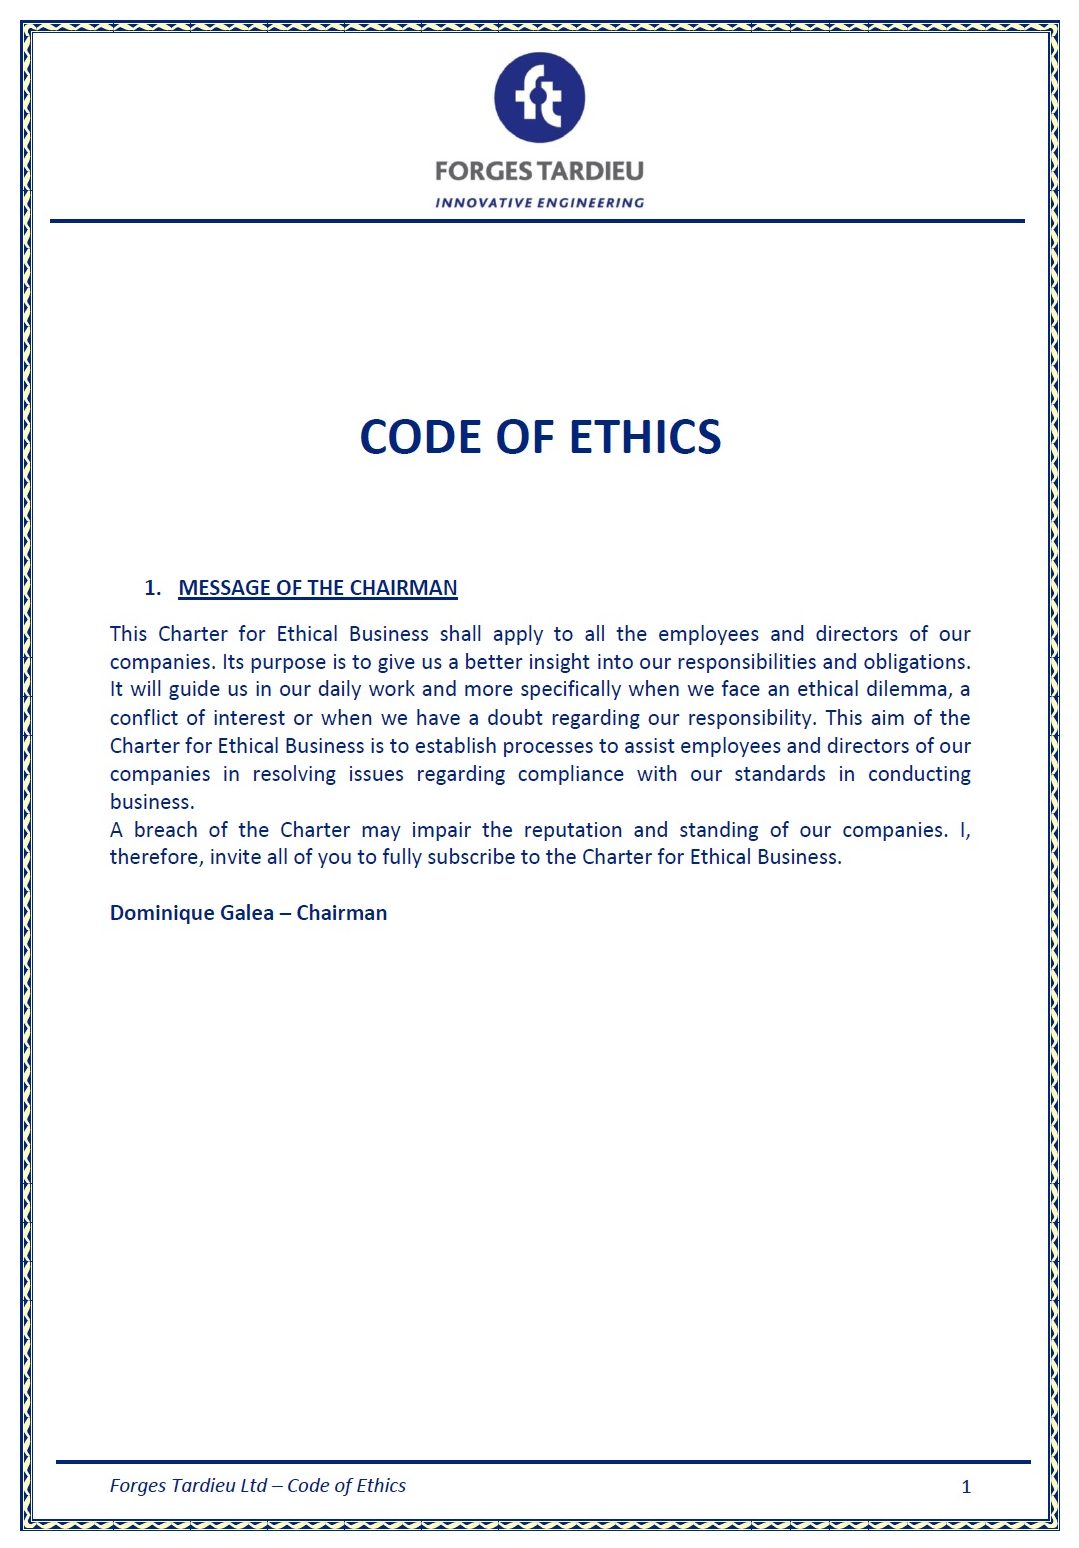 Code of Ethics - Front Page